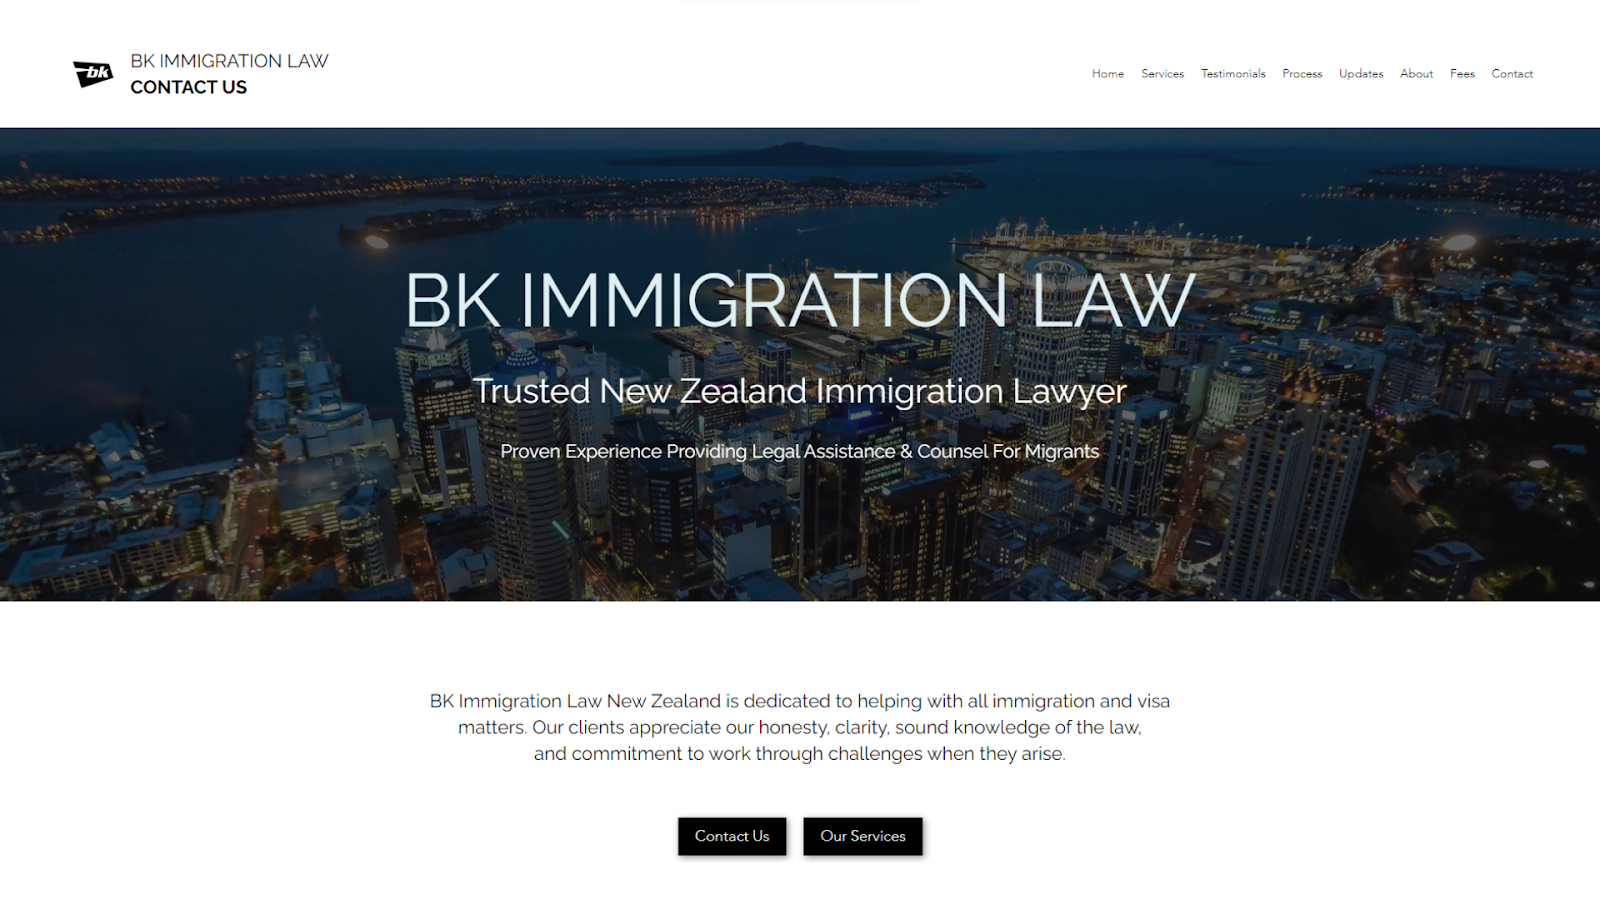 Screenshots from the BK Immigration Law website made with Wix